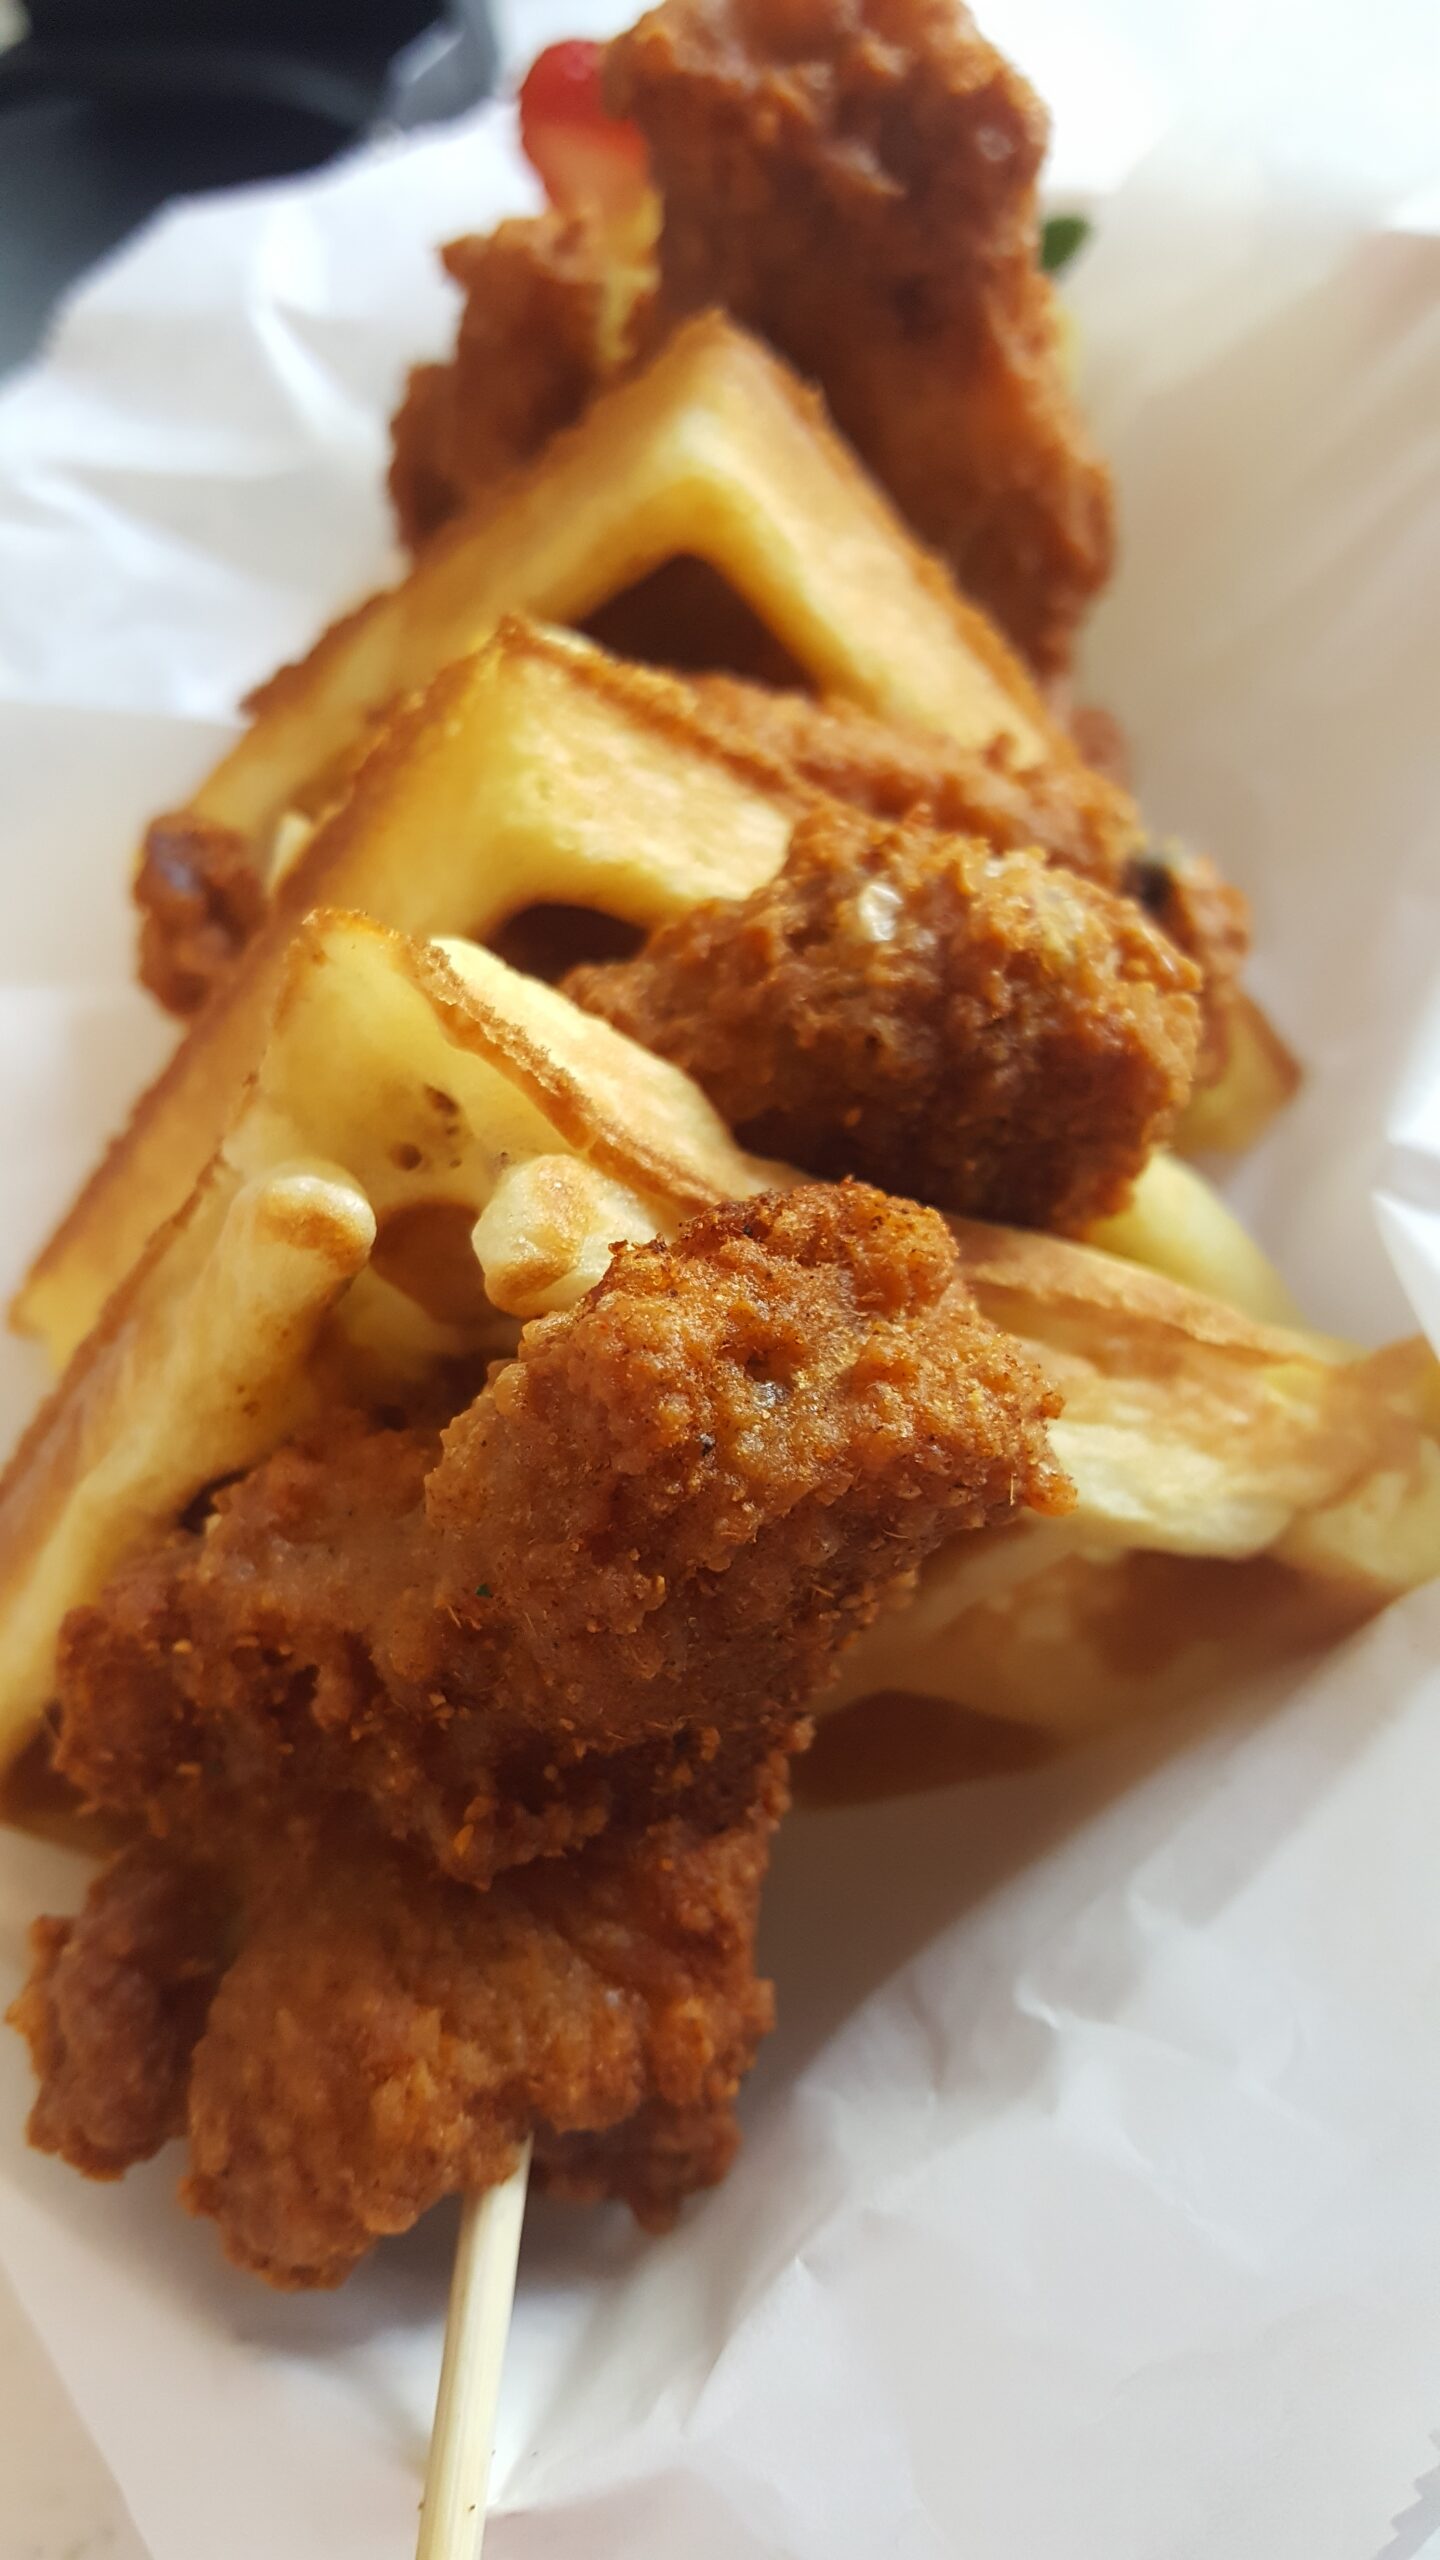 Chicken and Waffle Combo